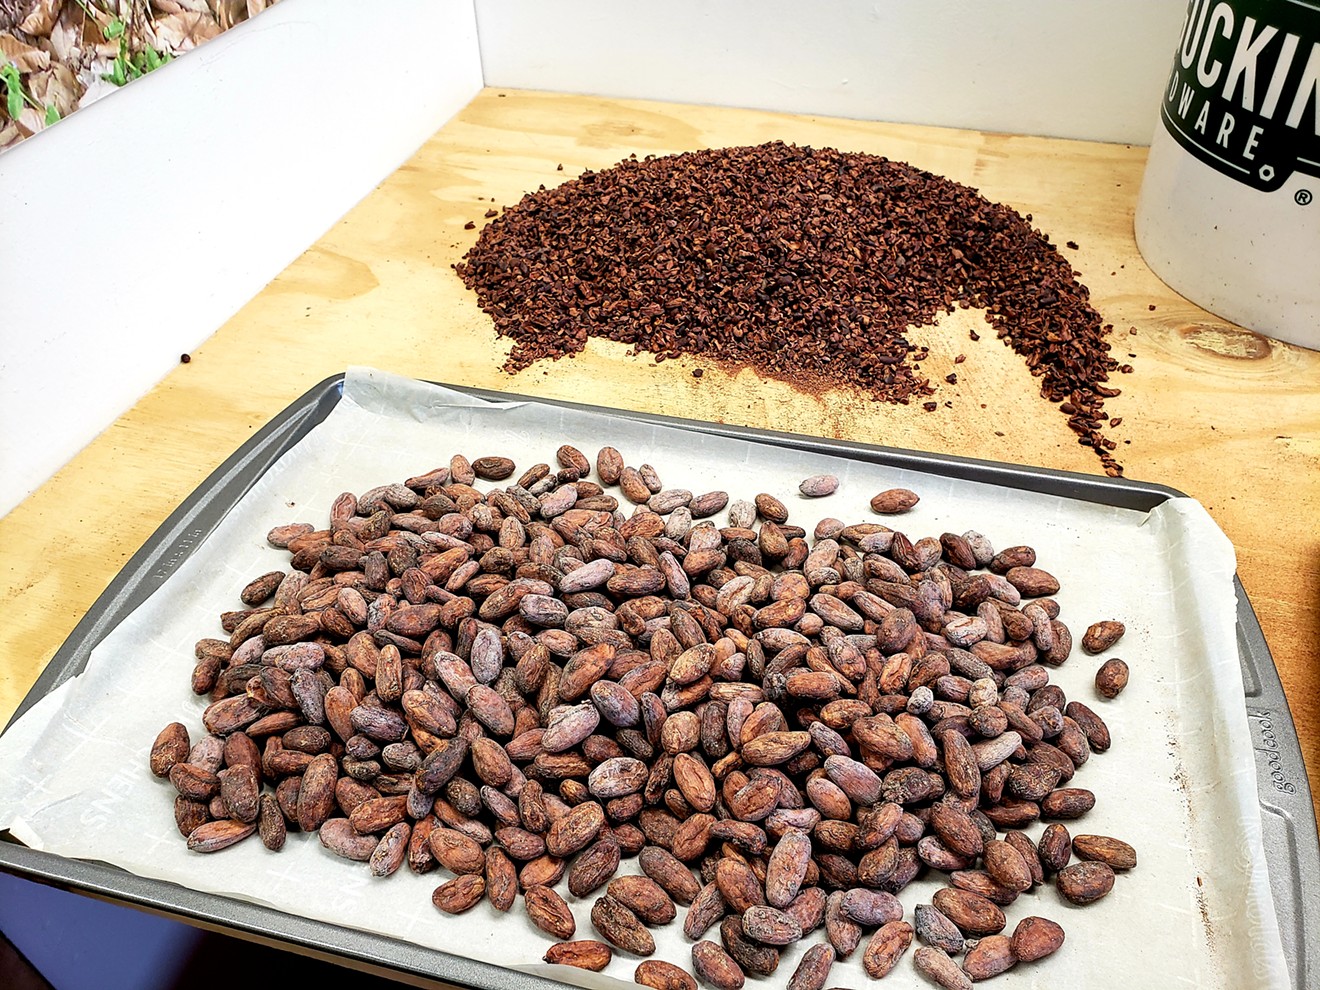 Cacao nibs and seeds.